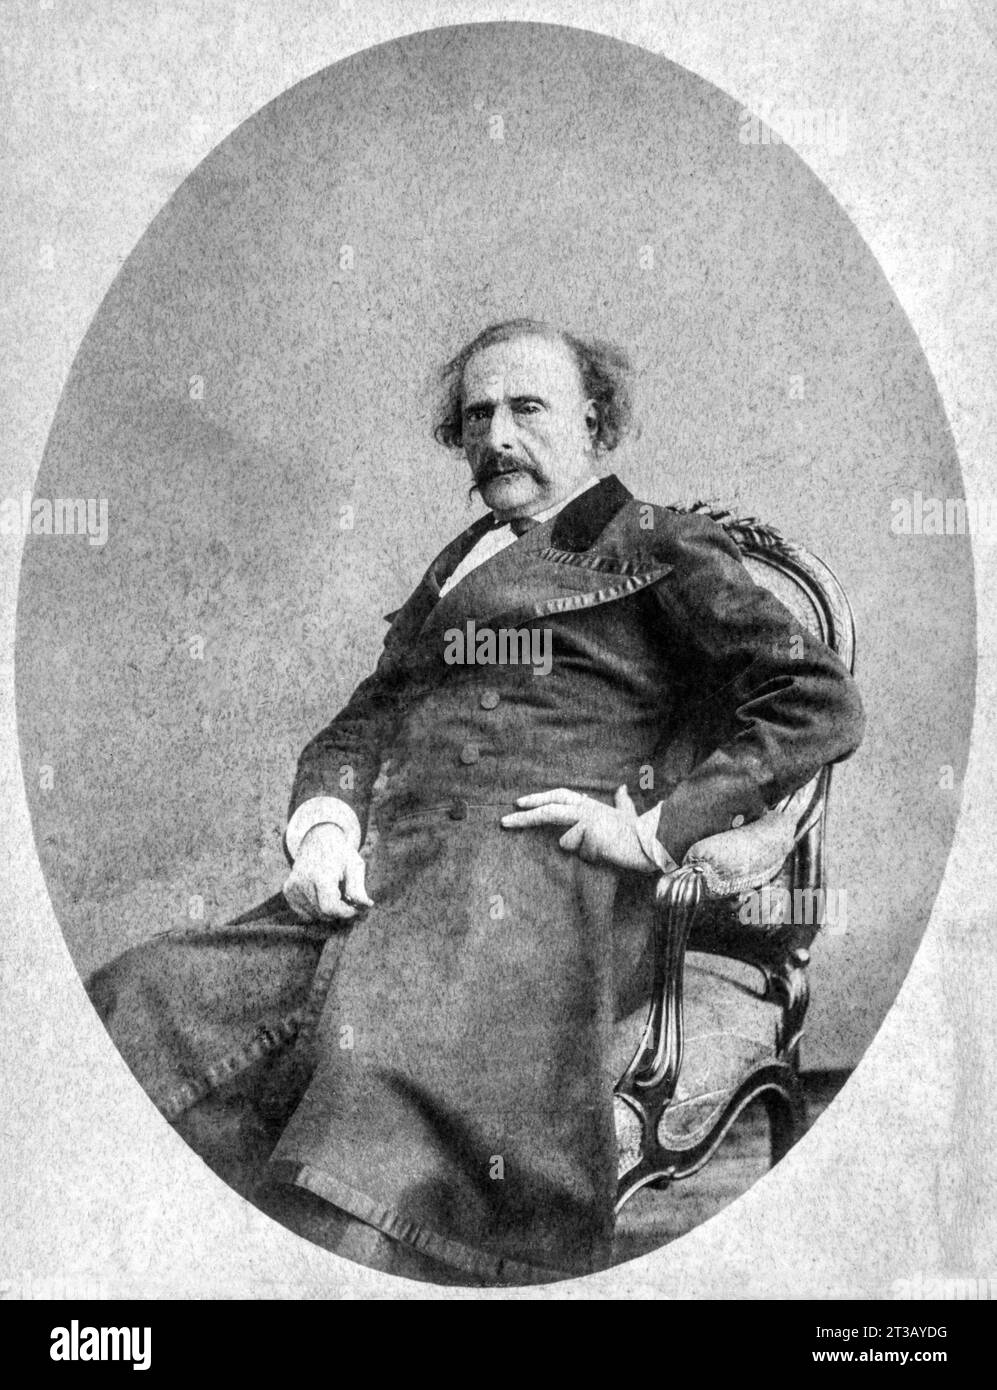 Photography , Portrait of Jules Amédée Barbey d'Aurevilly, known as Jules Barbey d'Aurevilly, is a French writer (1808 - 1889) Nicknamed the constable of letters by Léon Bloy, he contributed to enlivening French literary life in the second half of the 19th century . He was at the same time novelist, short story writer, essayist, poet, literary critic, journalist3, dandy (attitude of life that he theorized, before Baudelaire, through his essay On Dandyism and George Brummell), and polemicist. Stock Photo